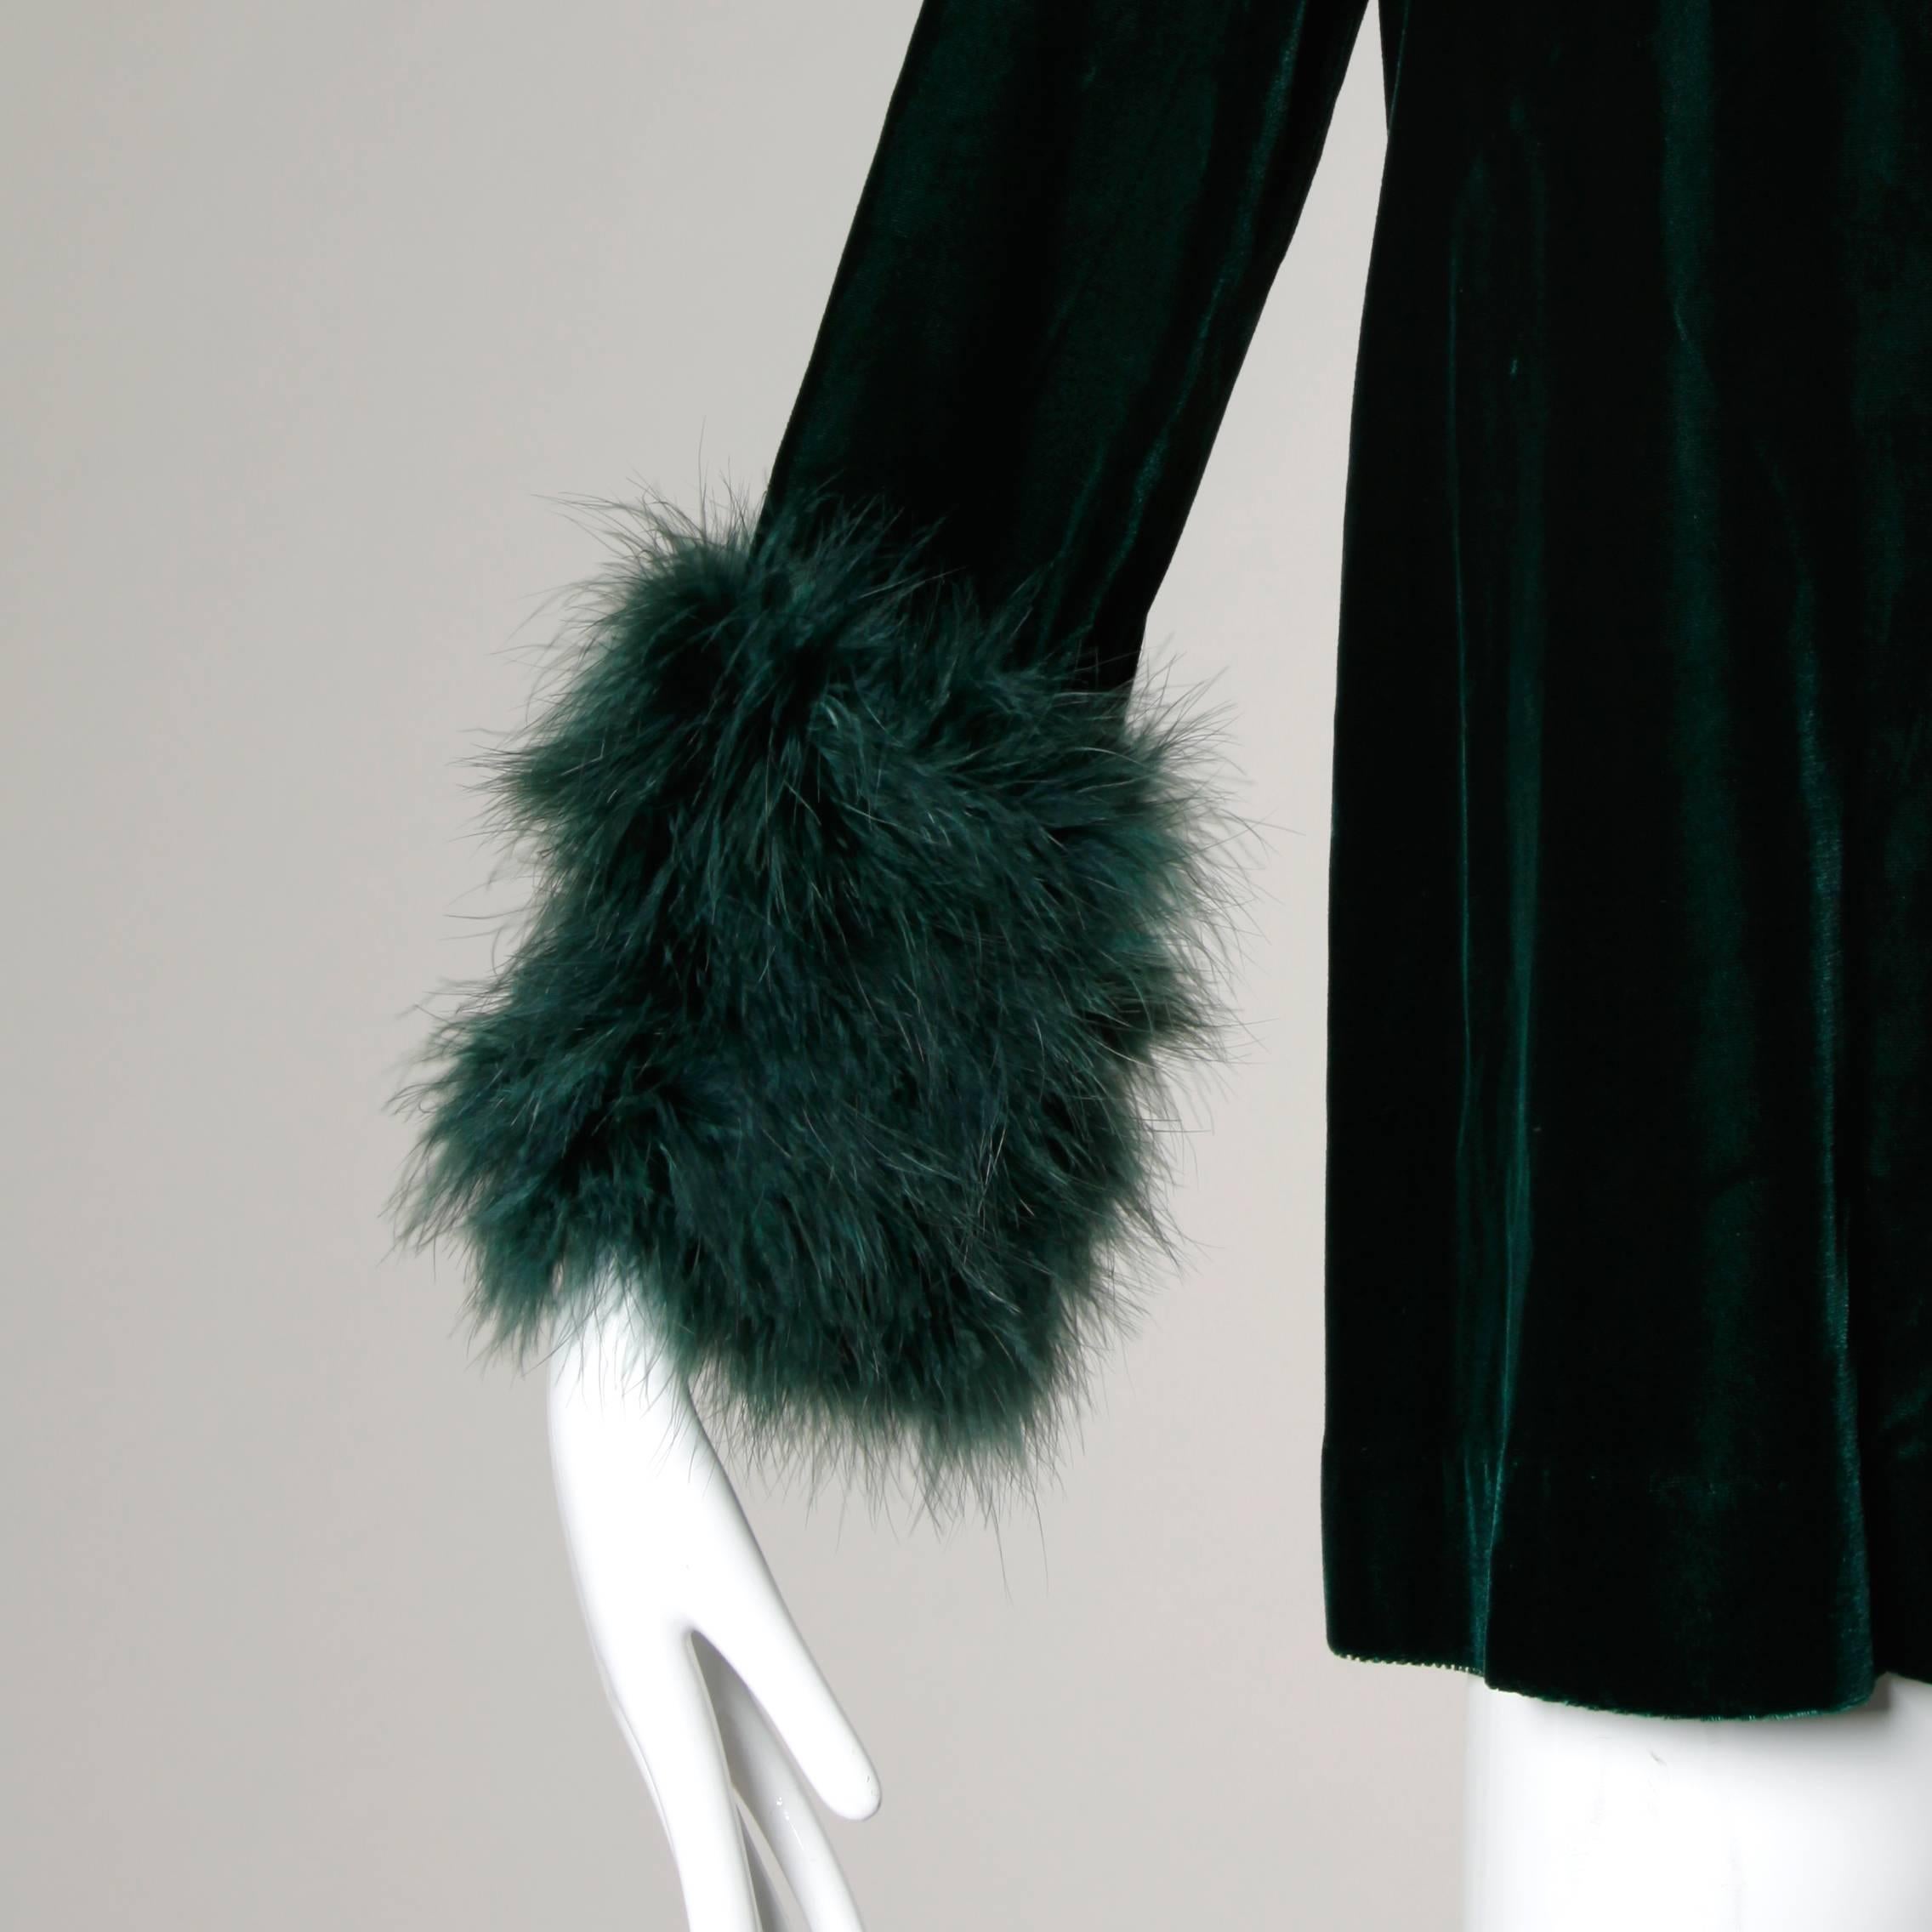 Vintage 1970s dark green velvet swing jacket with marabou feather cuffs. Fully lined with front snap closure. The marked size is 12, but the jacket fits more like a modern size small-medium. The measurements are as follows: Bust: 40